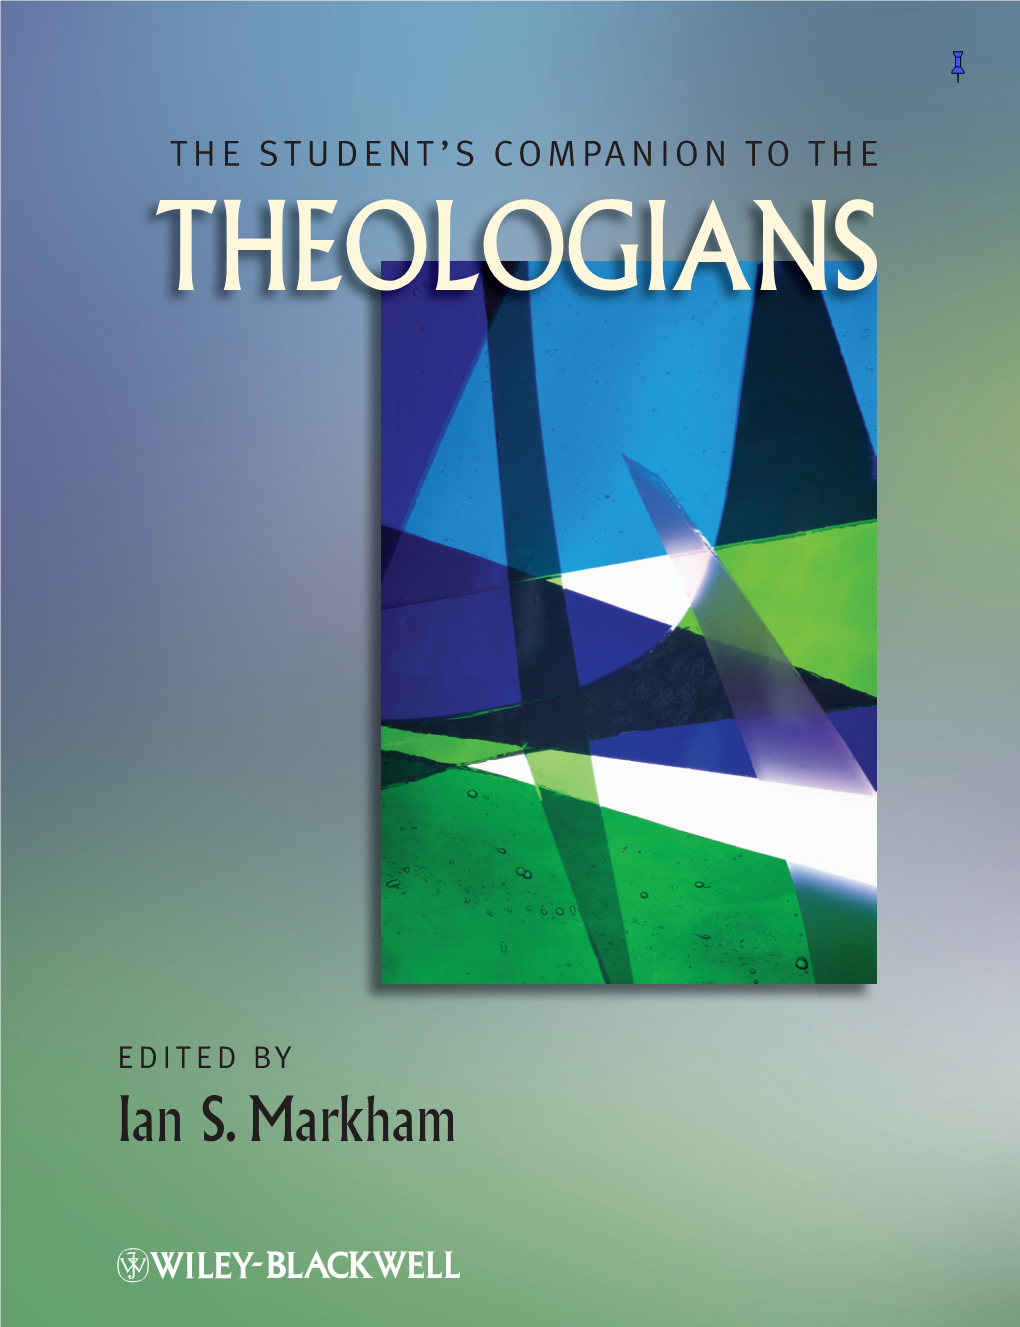 THEOLOGIANS Contemporary Scholars to Introduce the Theologians Responsible for Shaping the Christian Story